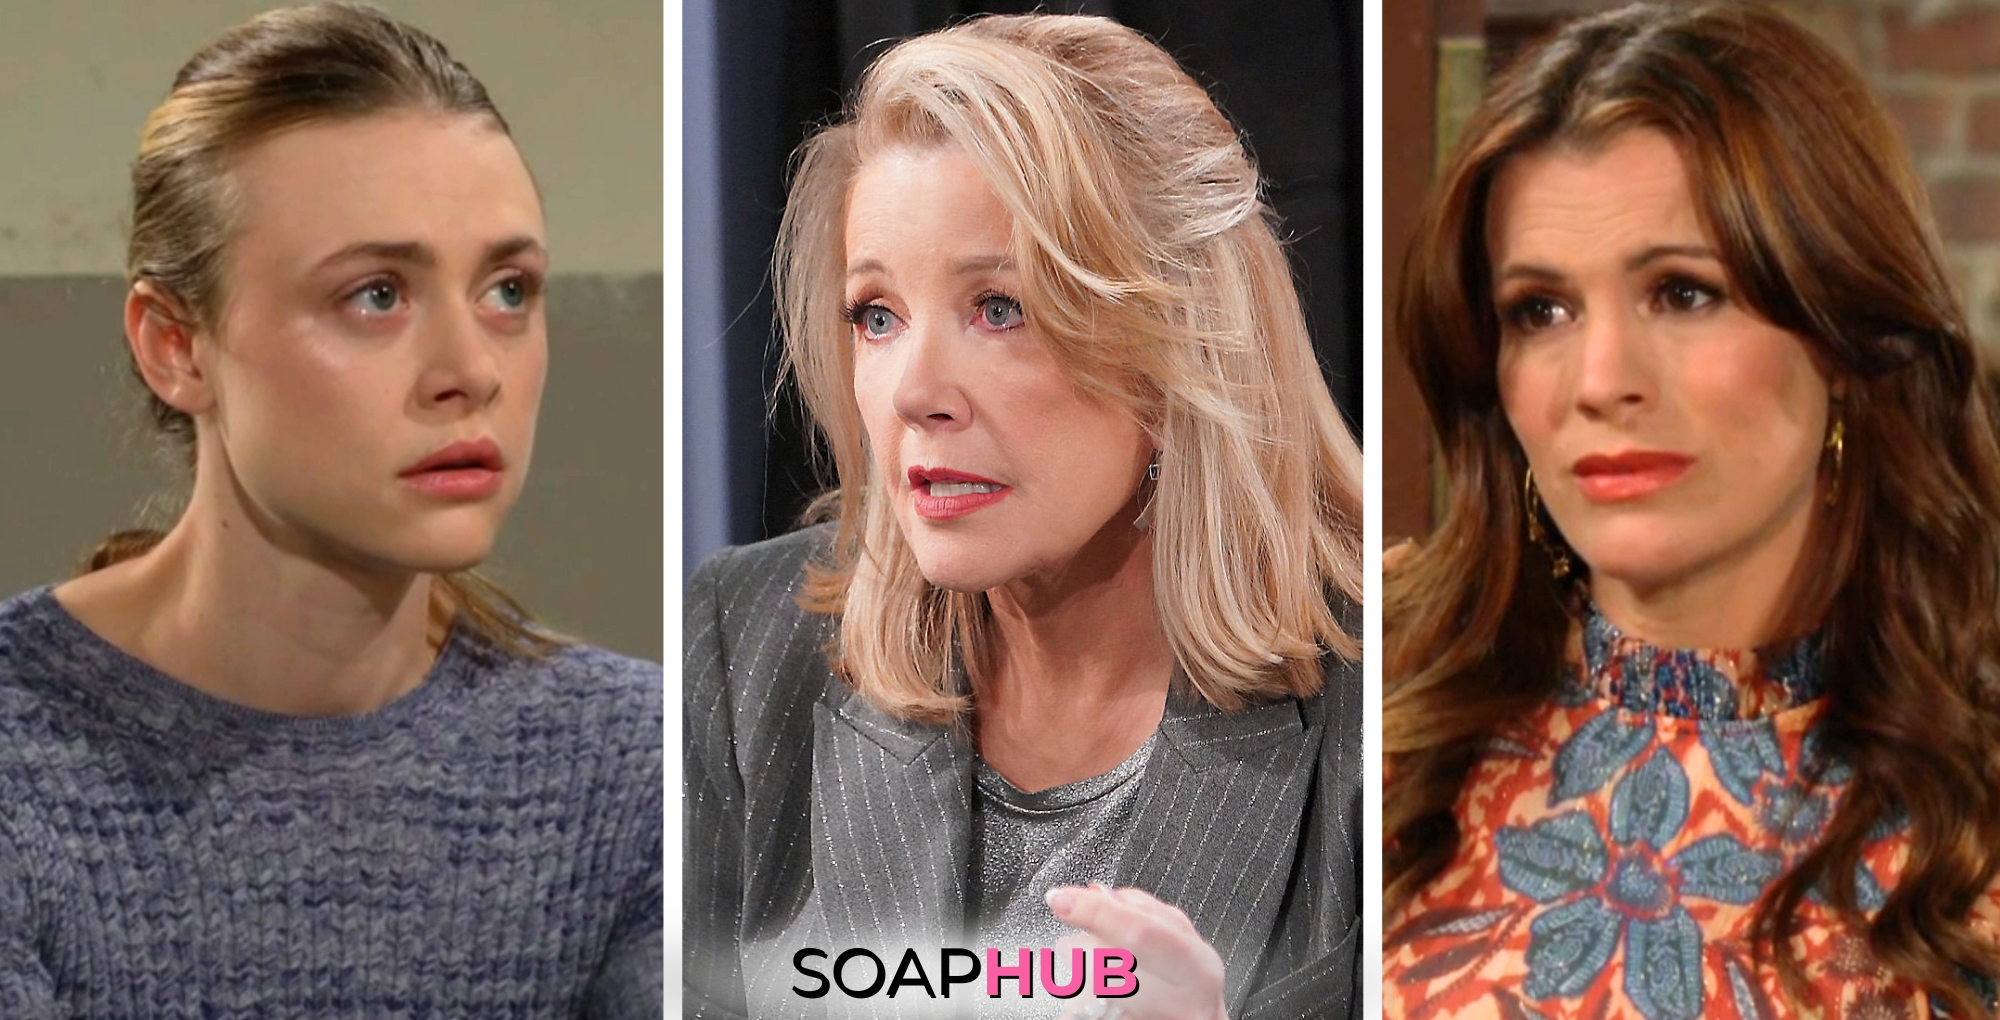 Weekly Y&R Spoilers: Busted Plans and New Rivals?